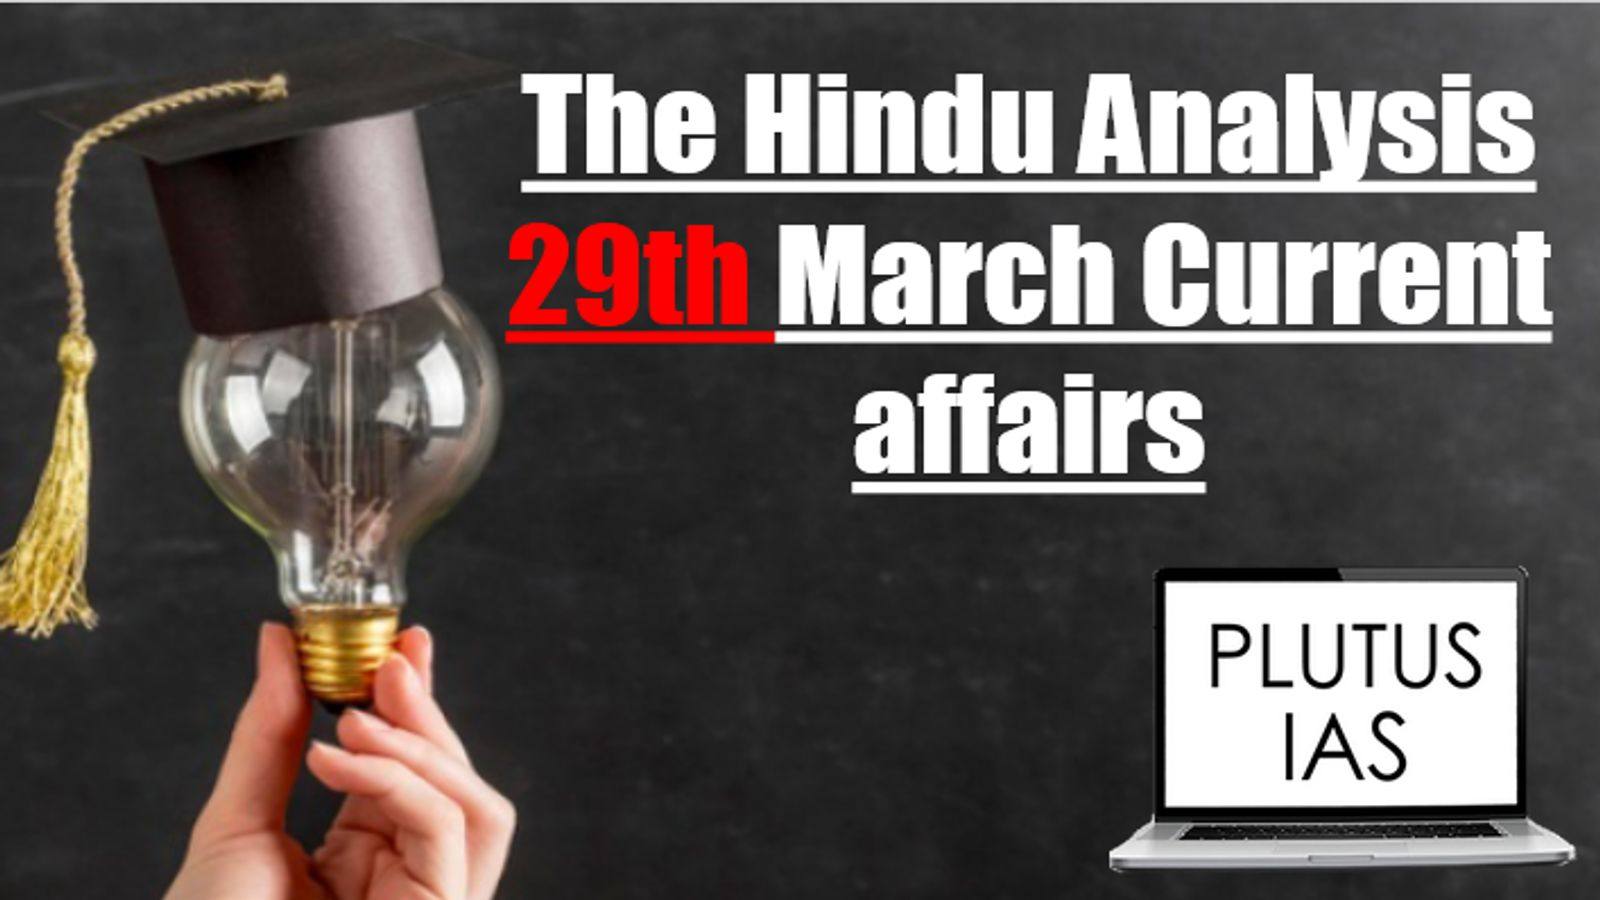 The Hindu Analysis 29 March Current Affairs